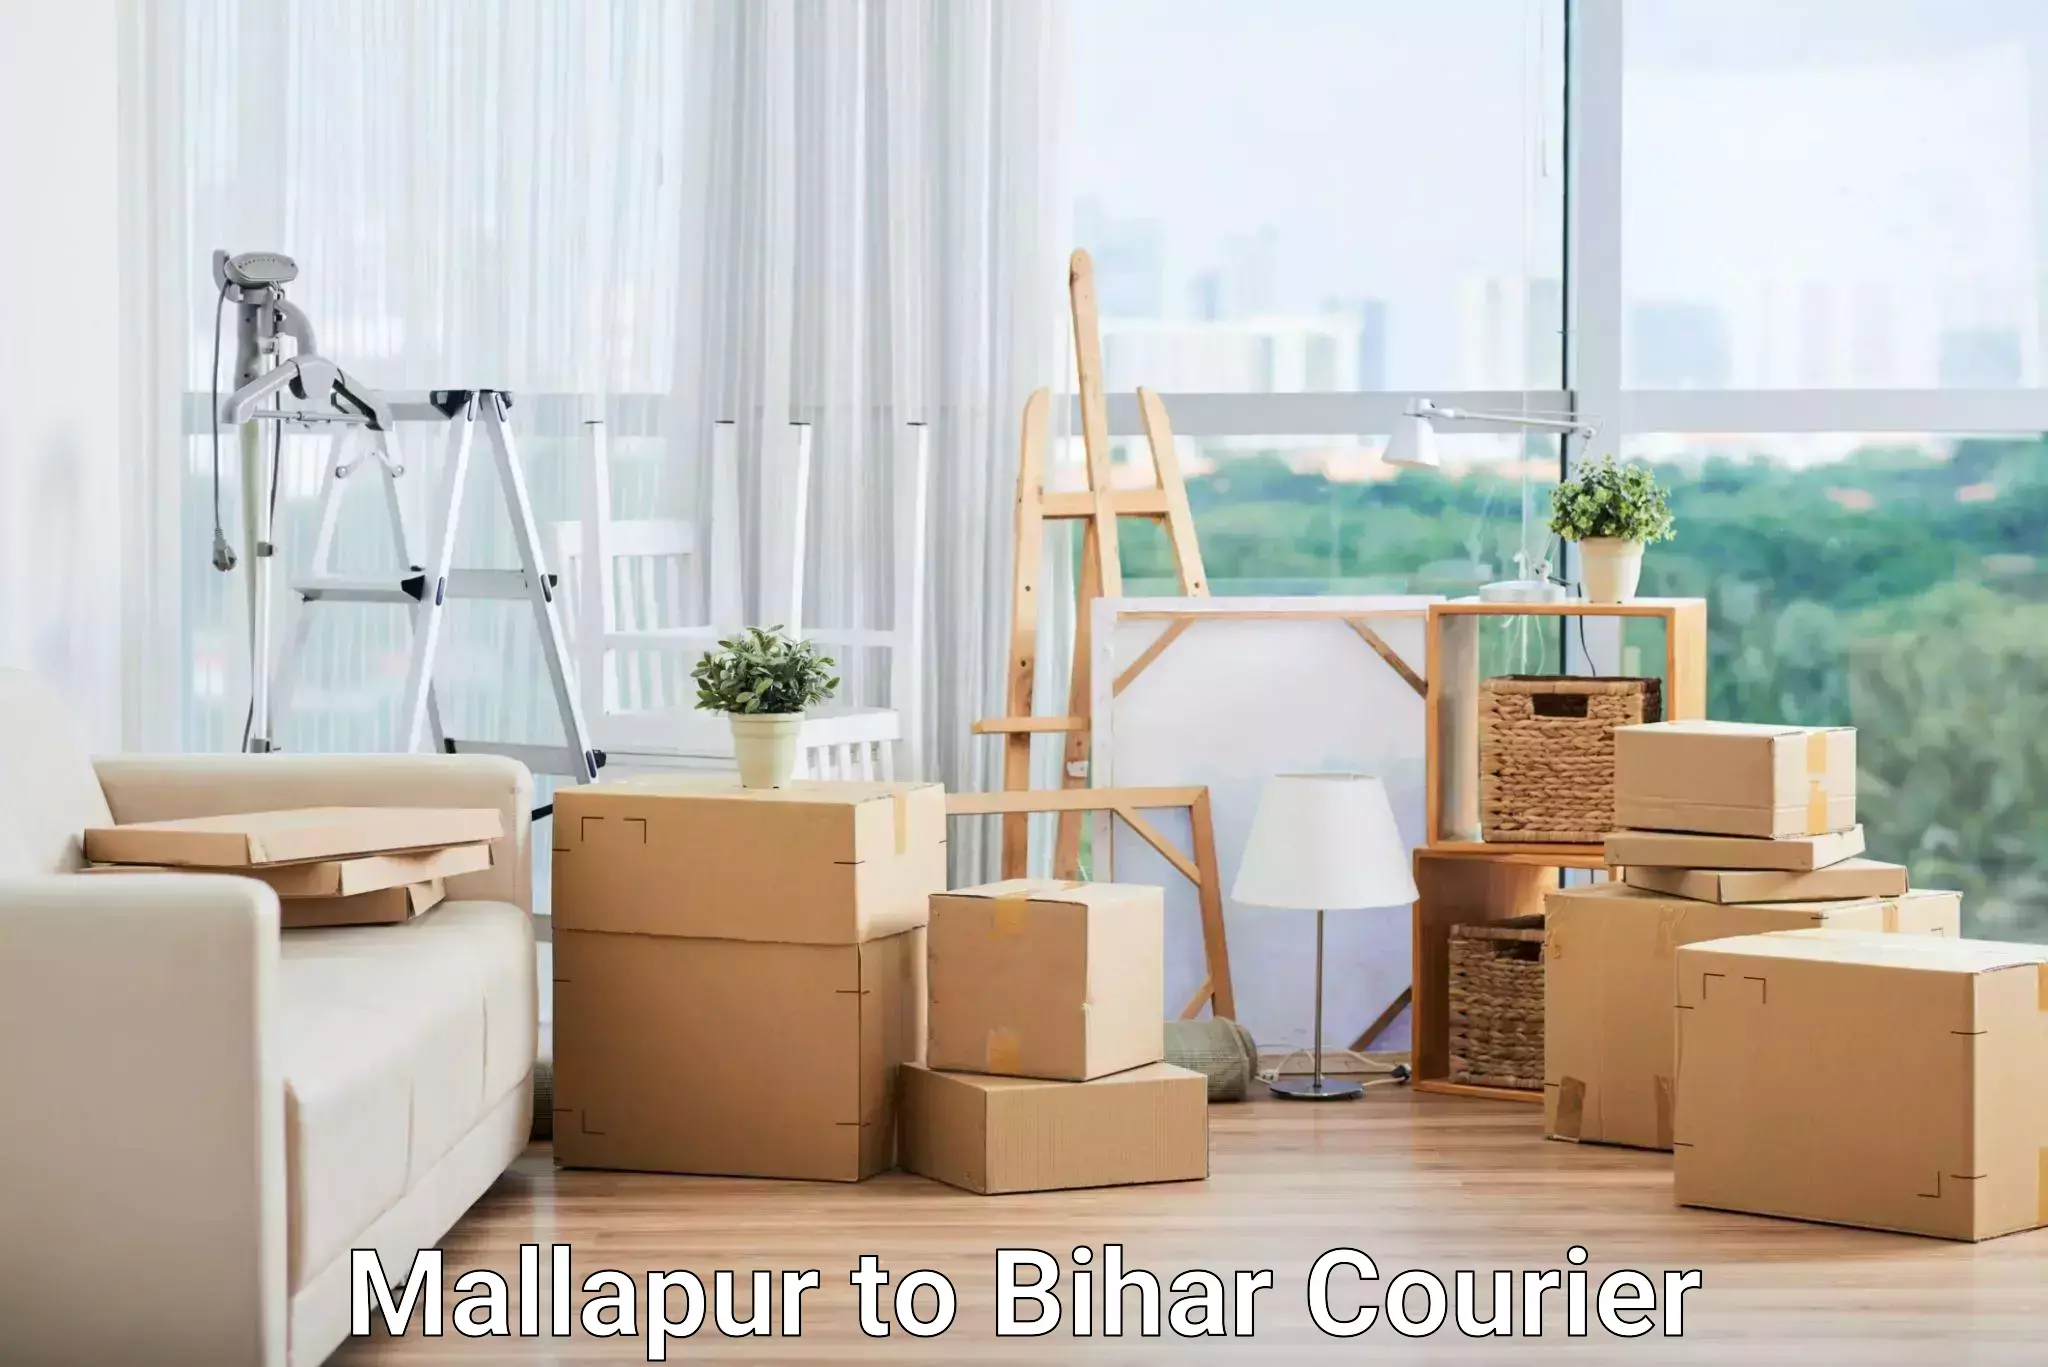 Nationwide shipping coverage Mallapur to Chainpur